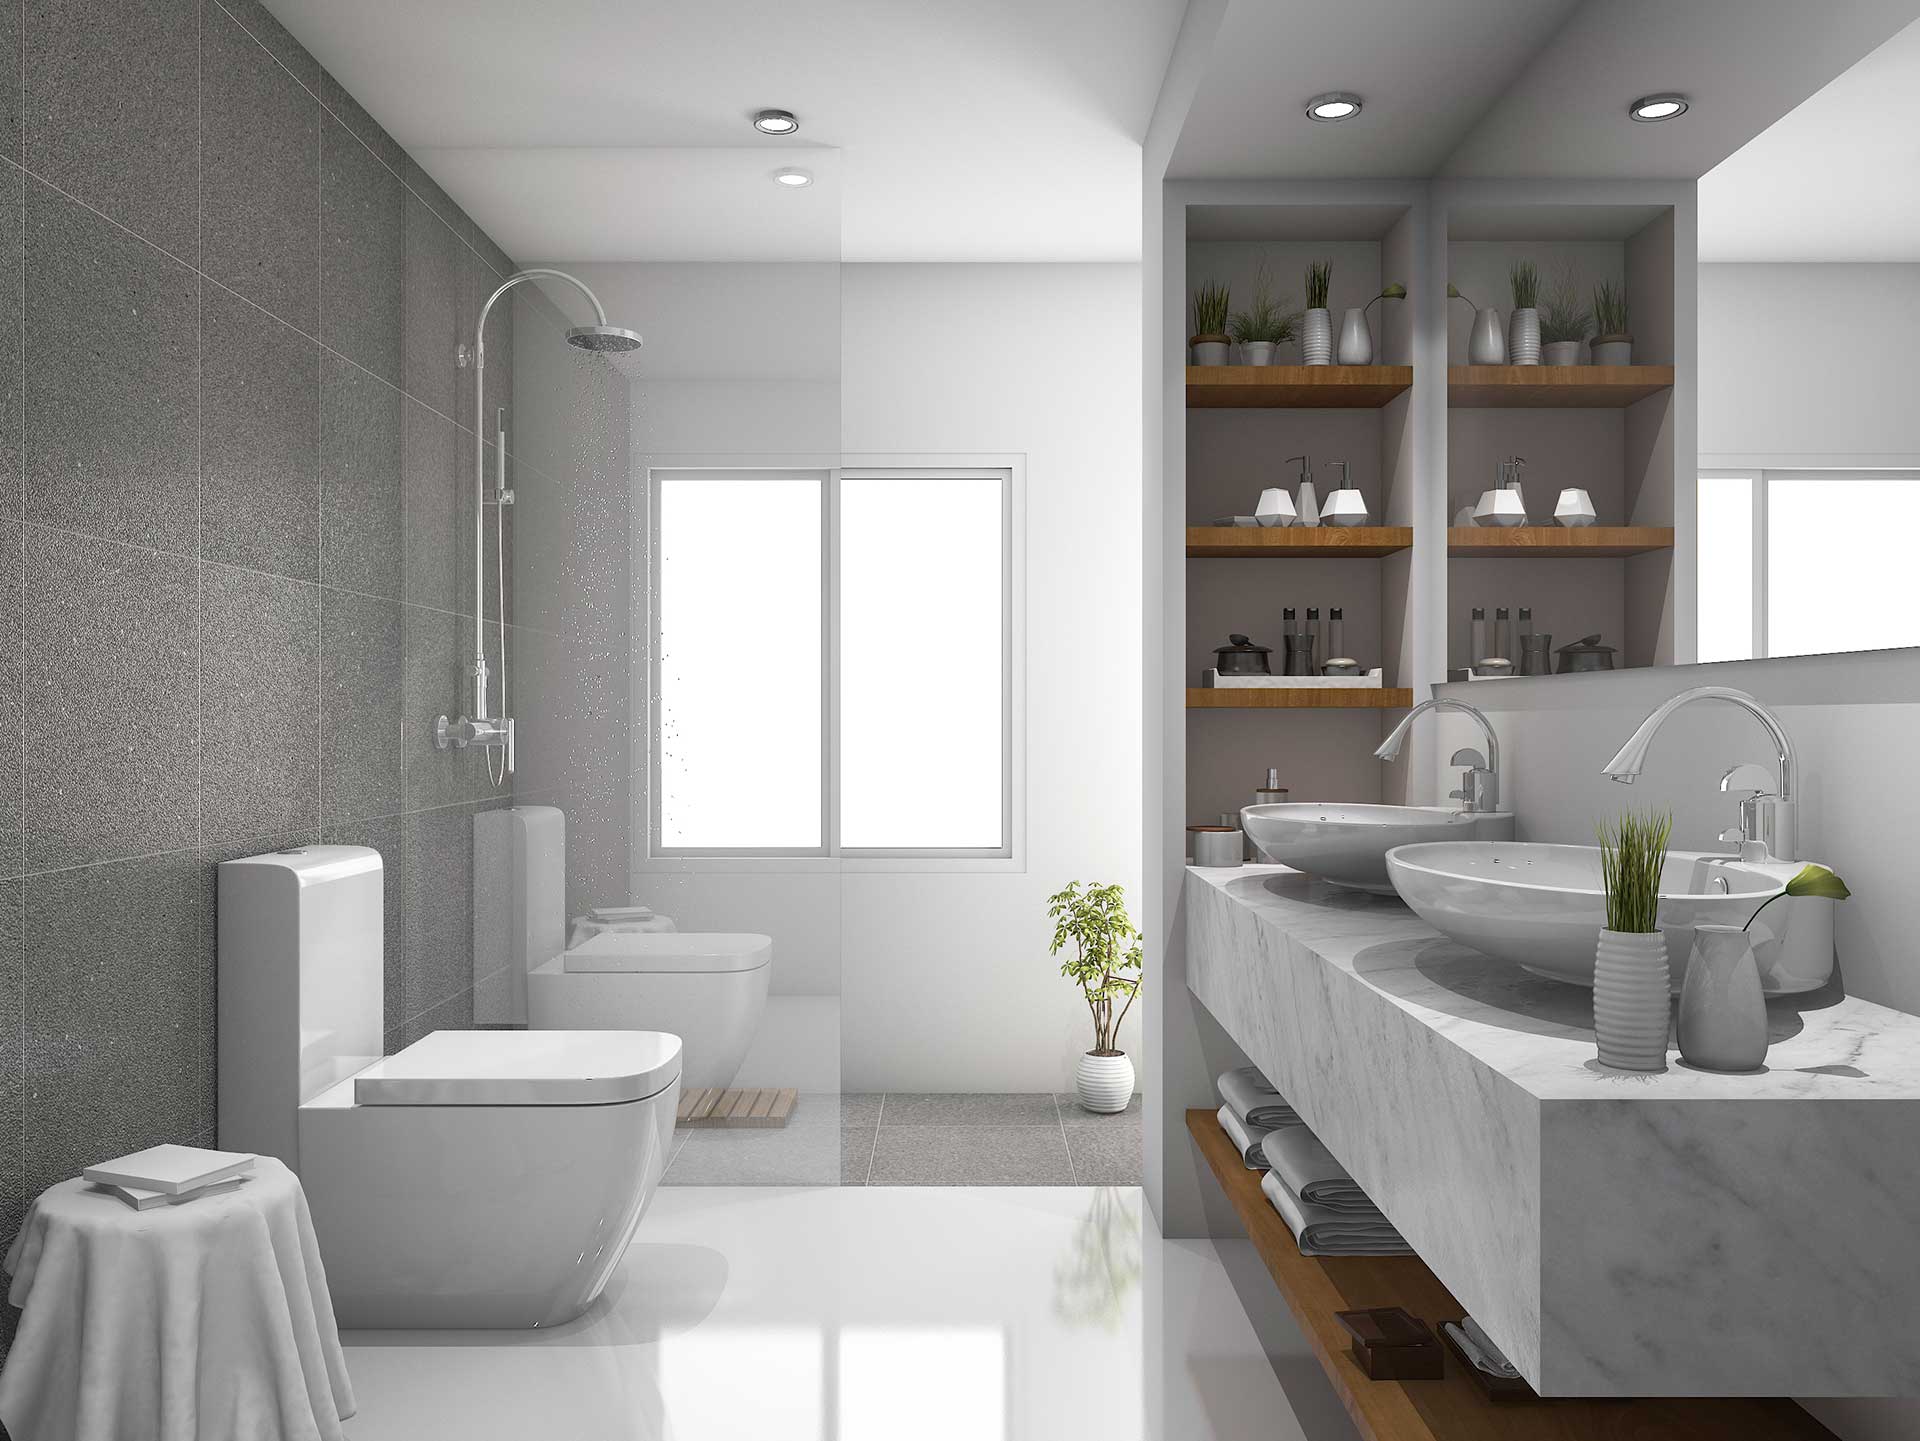 Modern bathroom with large shower, white toilet and double sink with marble counter and wood-like storage space underneath and on the side